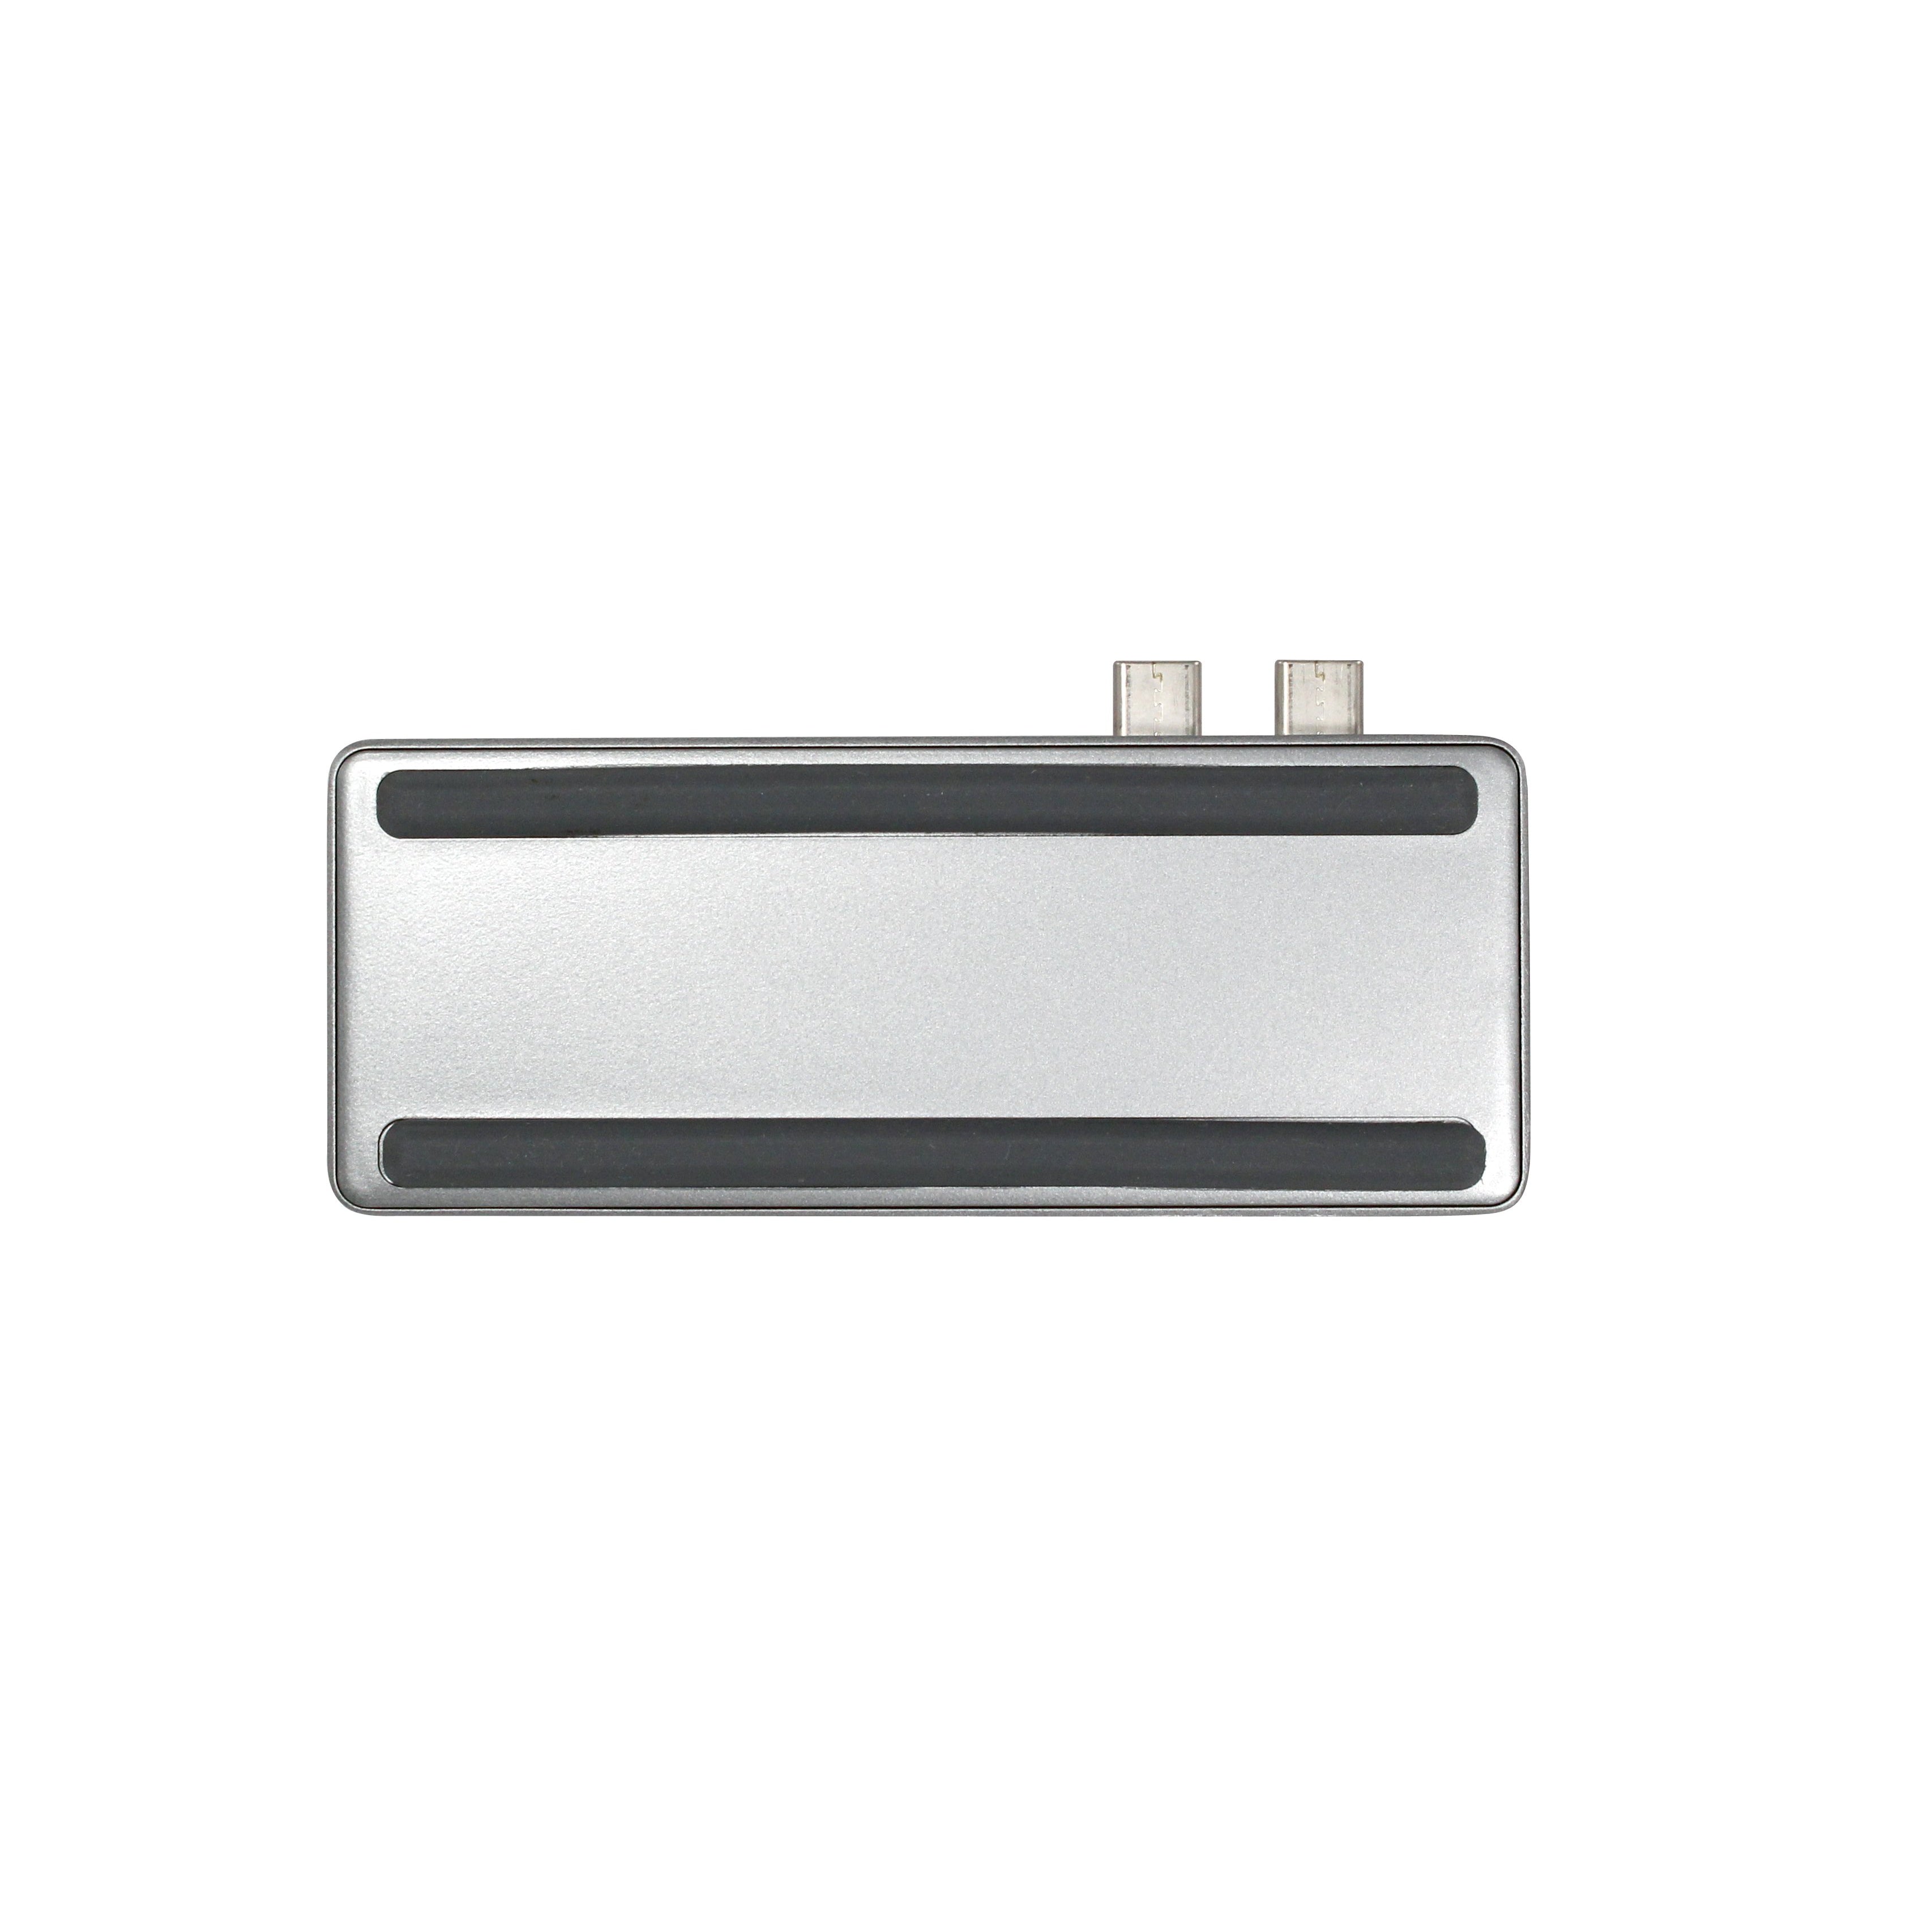 USB-C Hub for New MacBook Pro - Space Grey